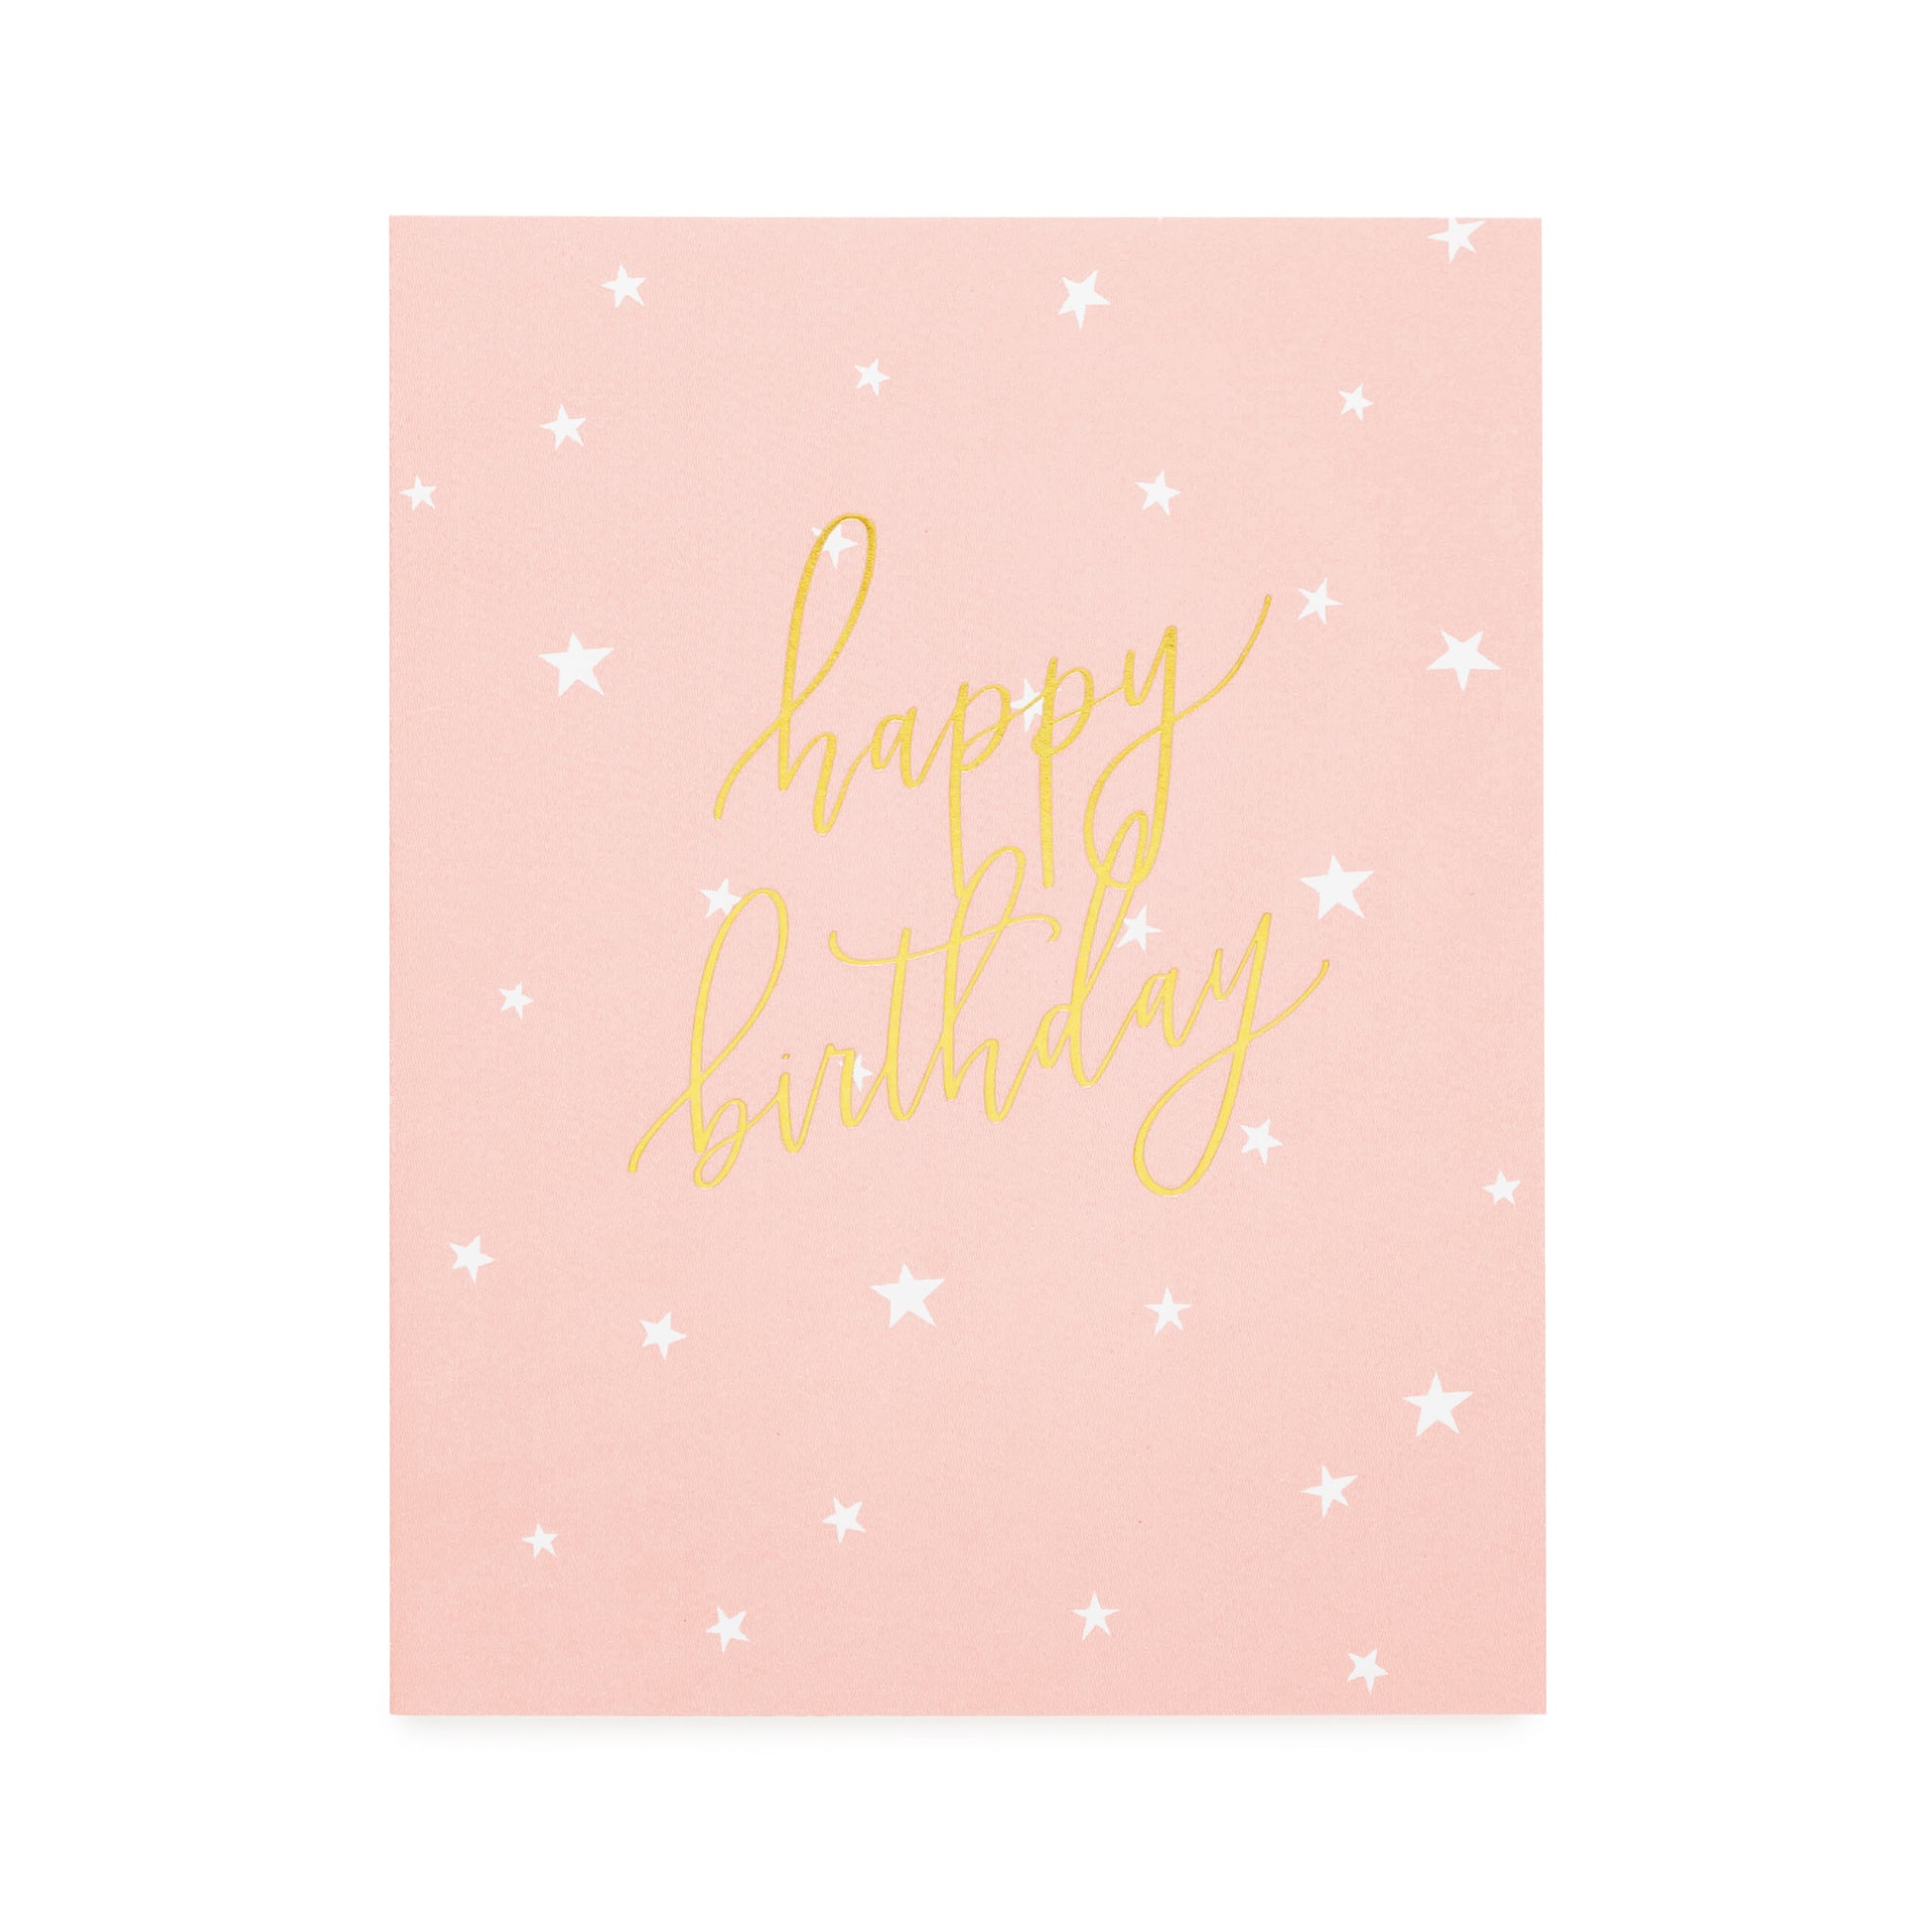 rose pink card with white scattered stars and gold script happy birthday